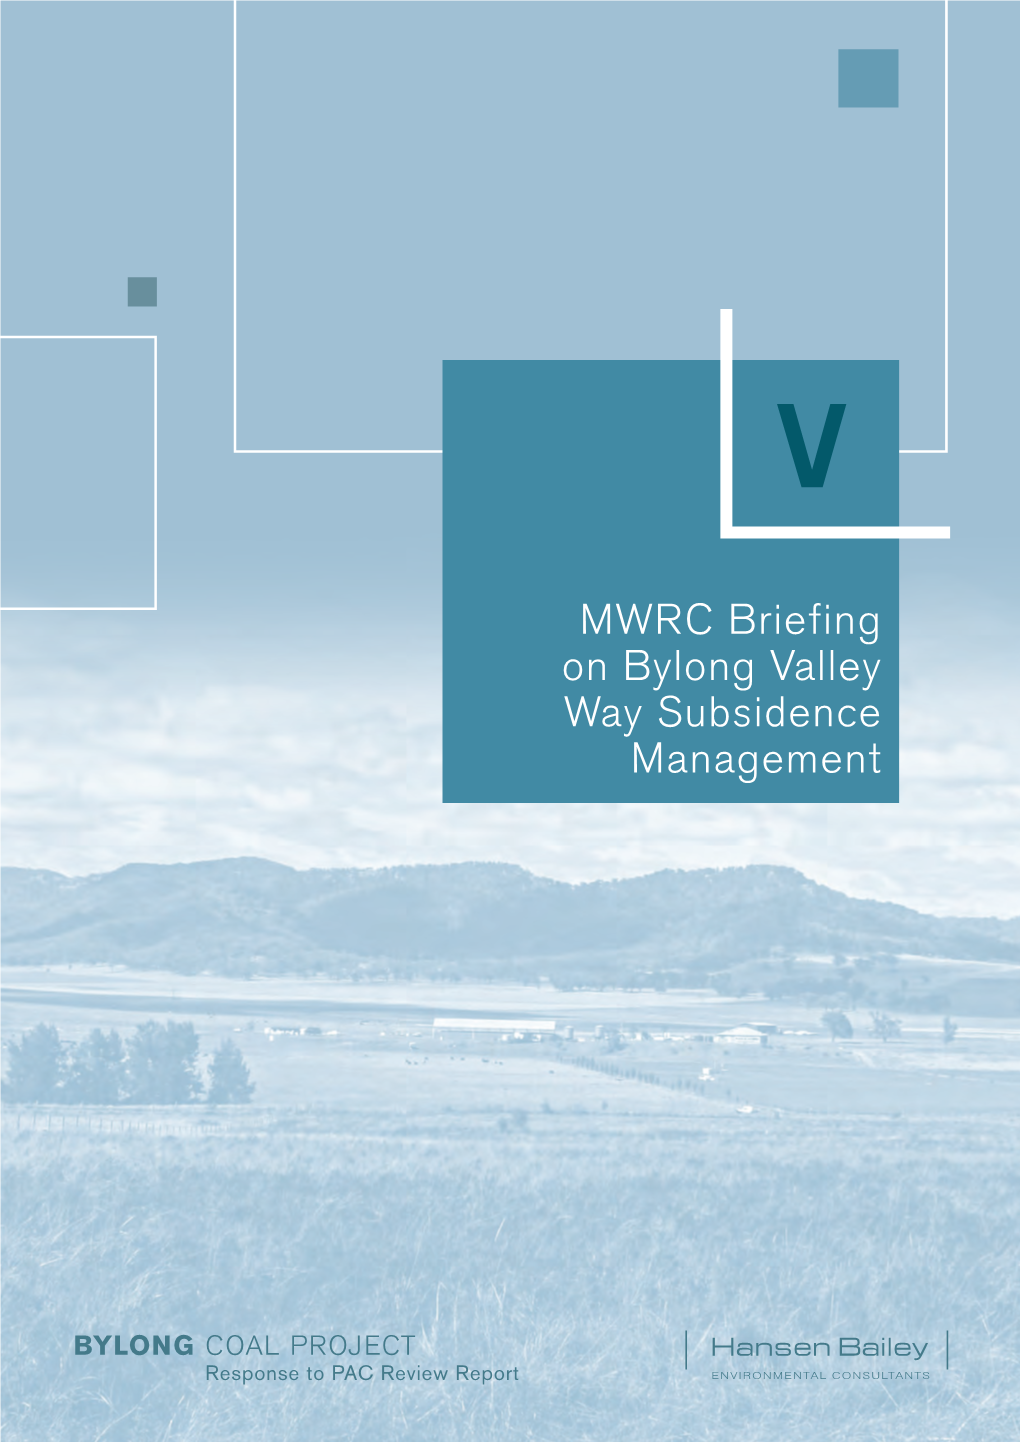 MWRC Briefing on Bylong Valley Way Subsidence Management